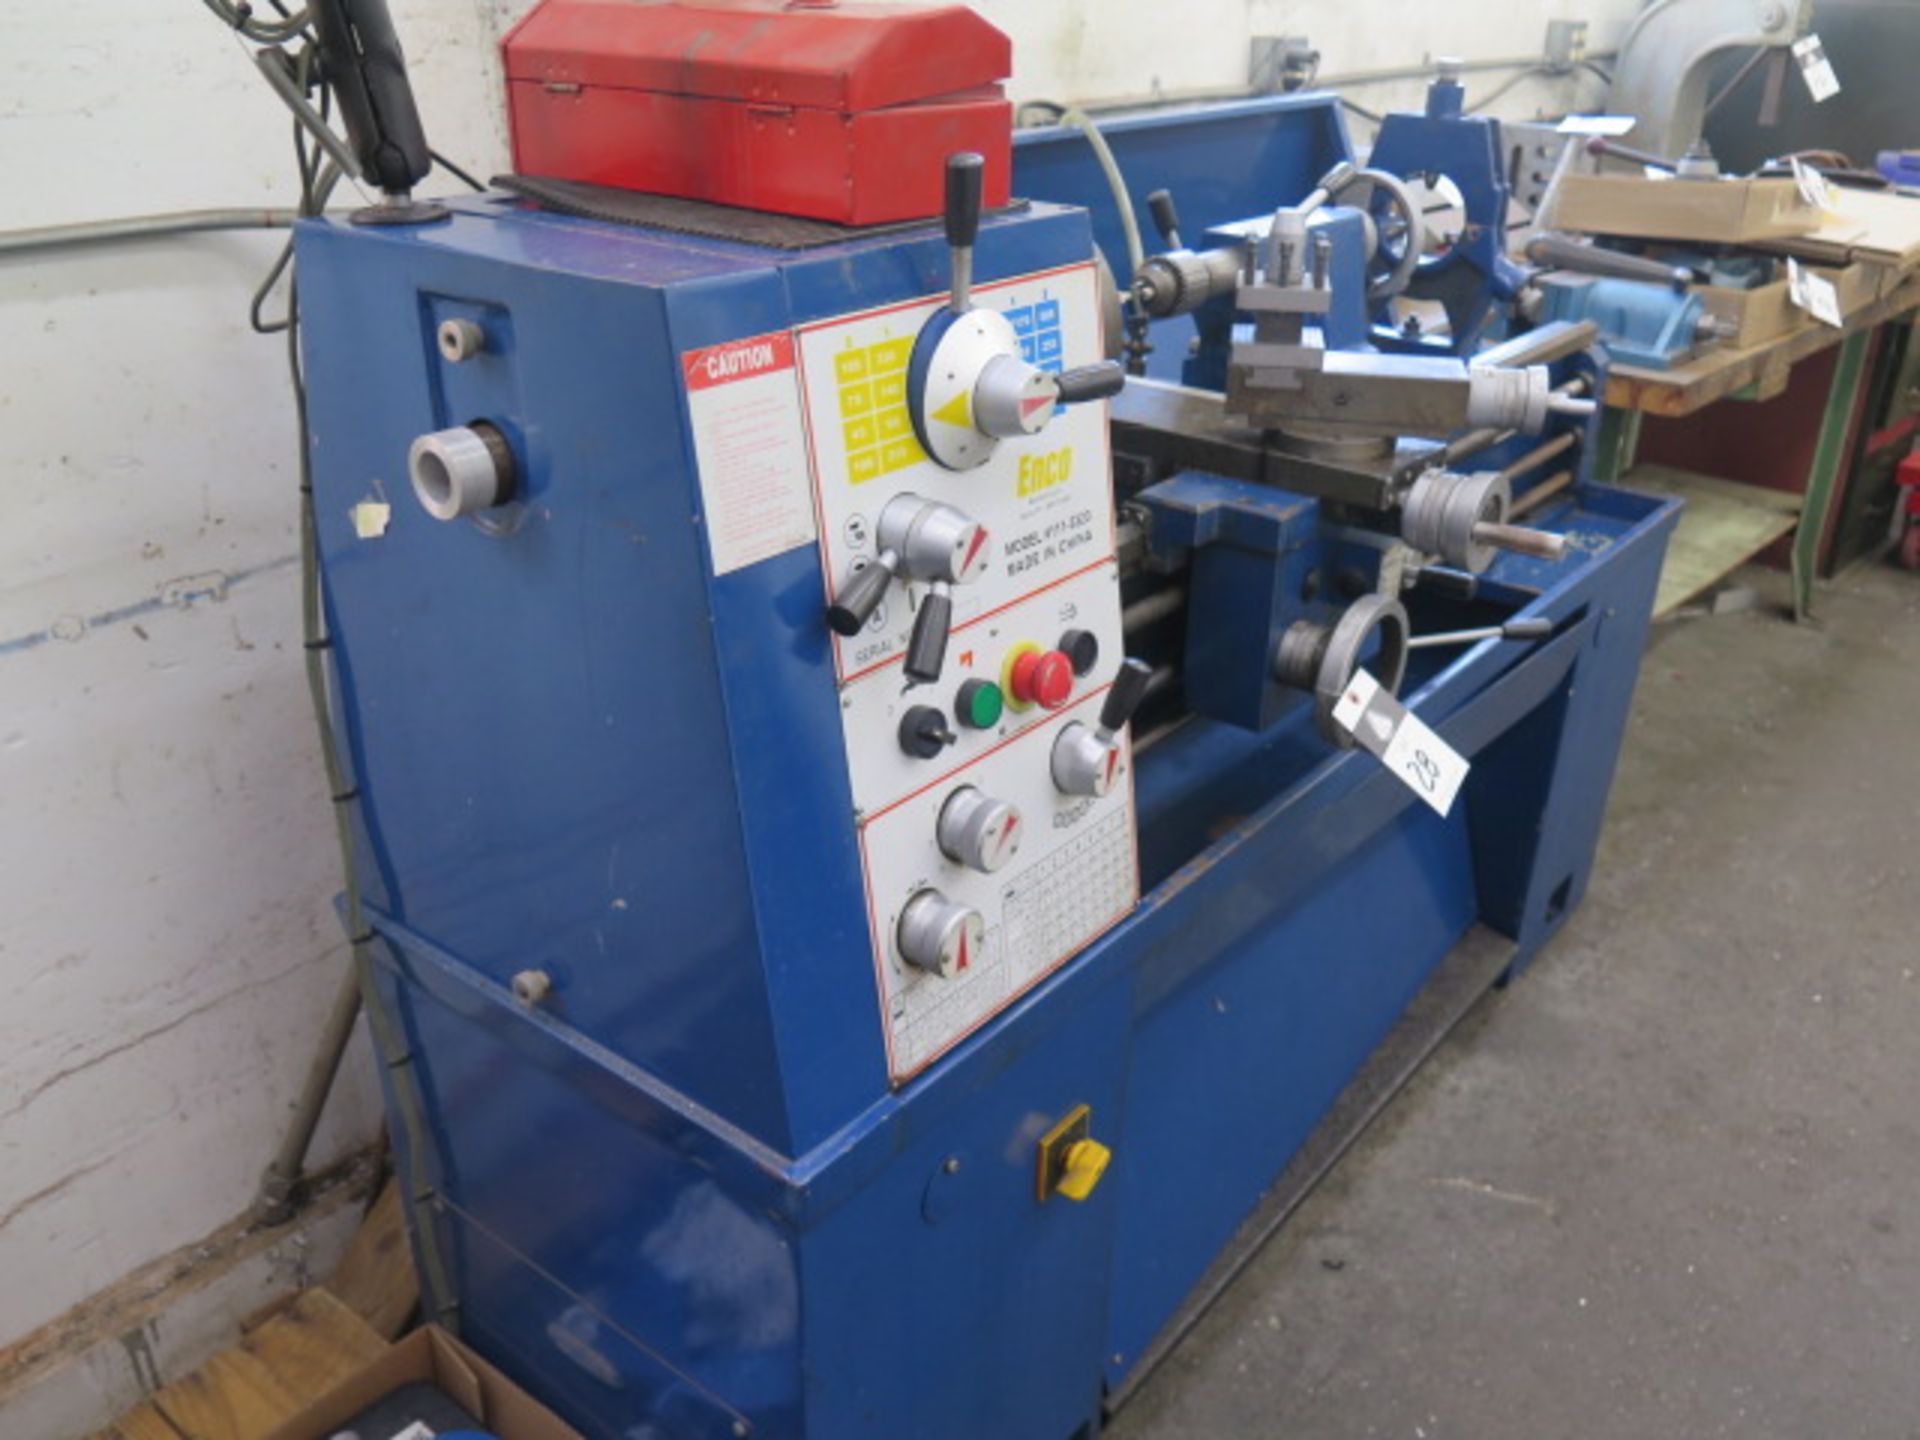 Enco mdl. 111-332 14” x 42” Gap Bed Lathe s/n 022647 w/ Acu-Rite DRO, 46-1800 RPM, SOLD AS IS - Image 3 of 15